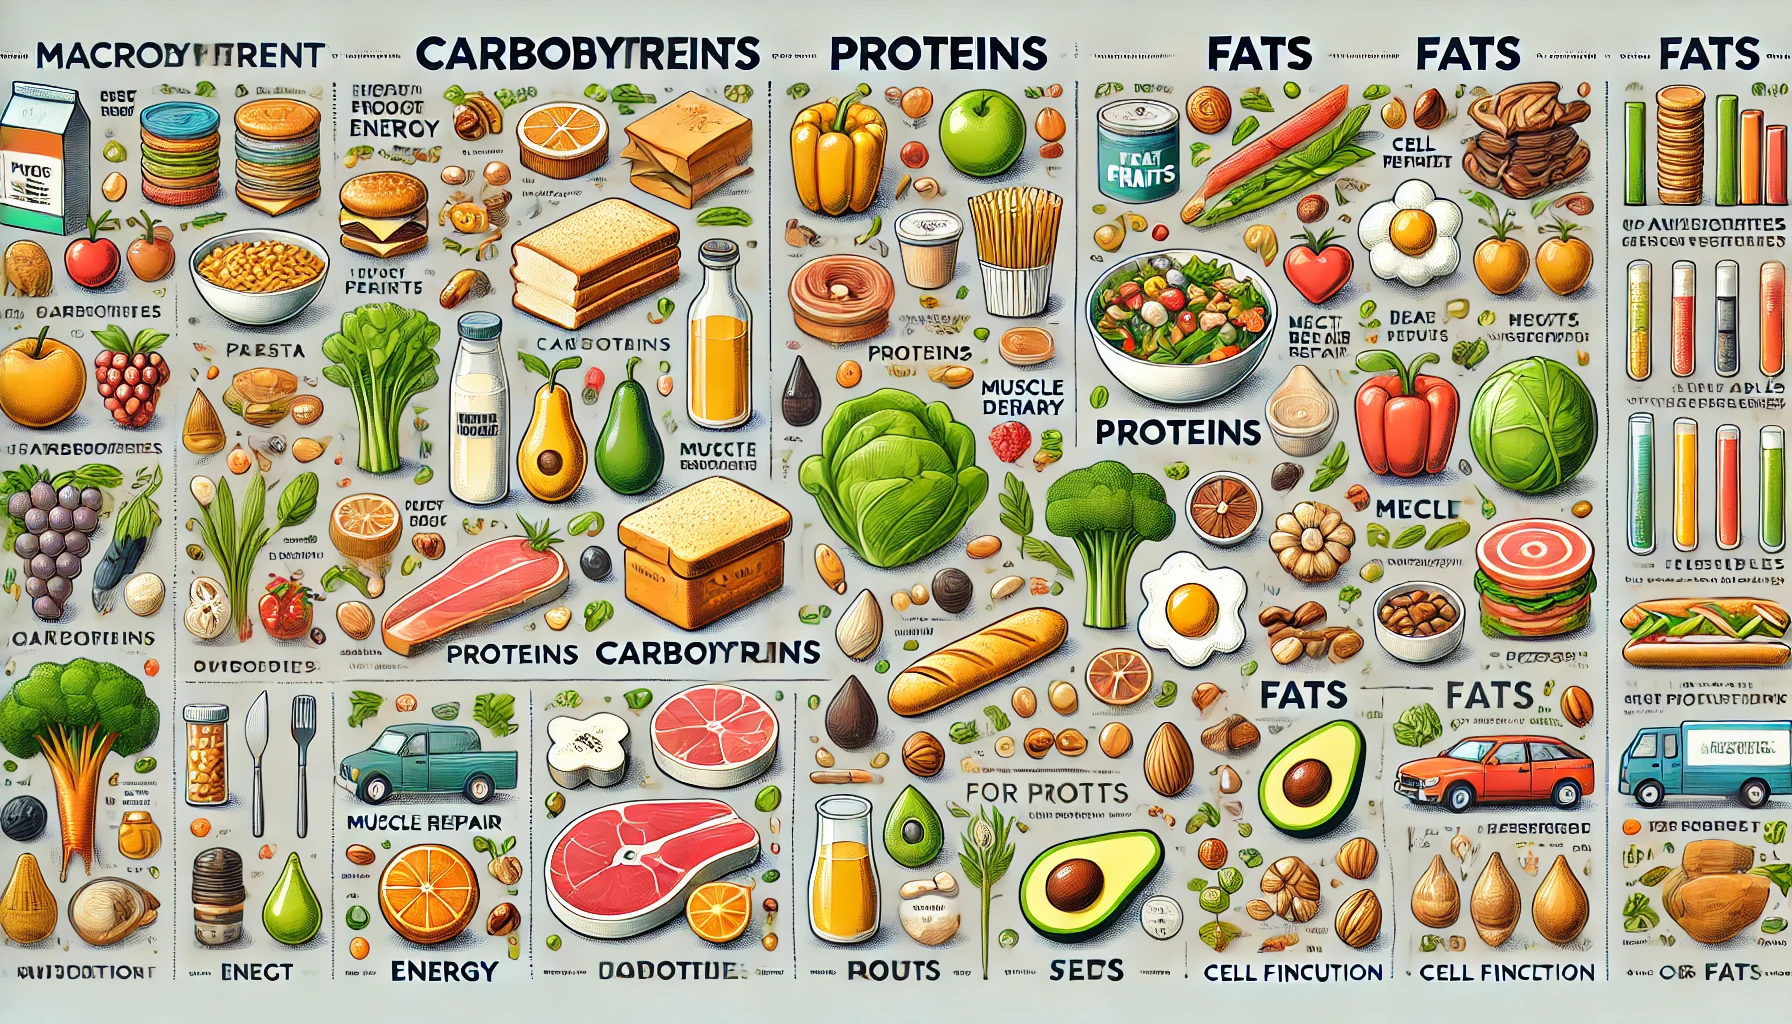 What Are Macronutrients and Why Are They Important?